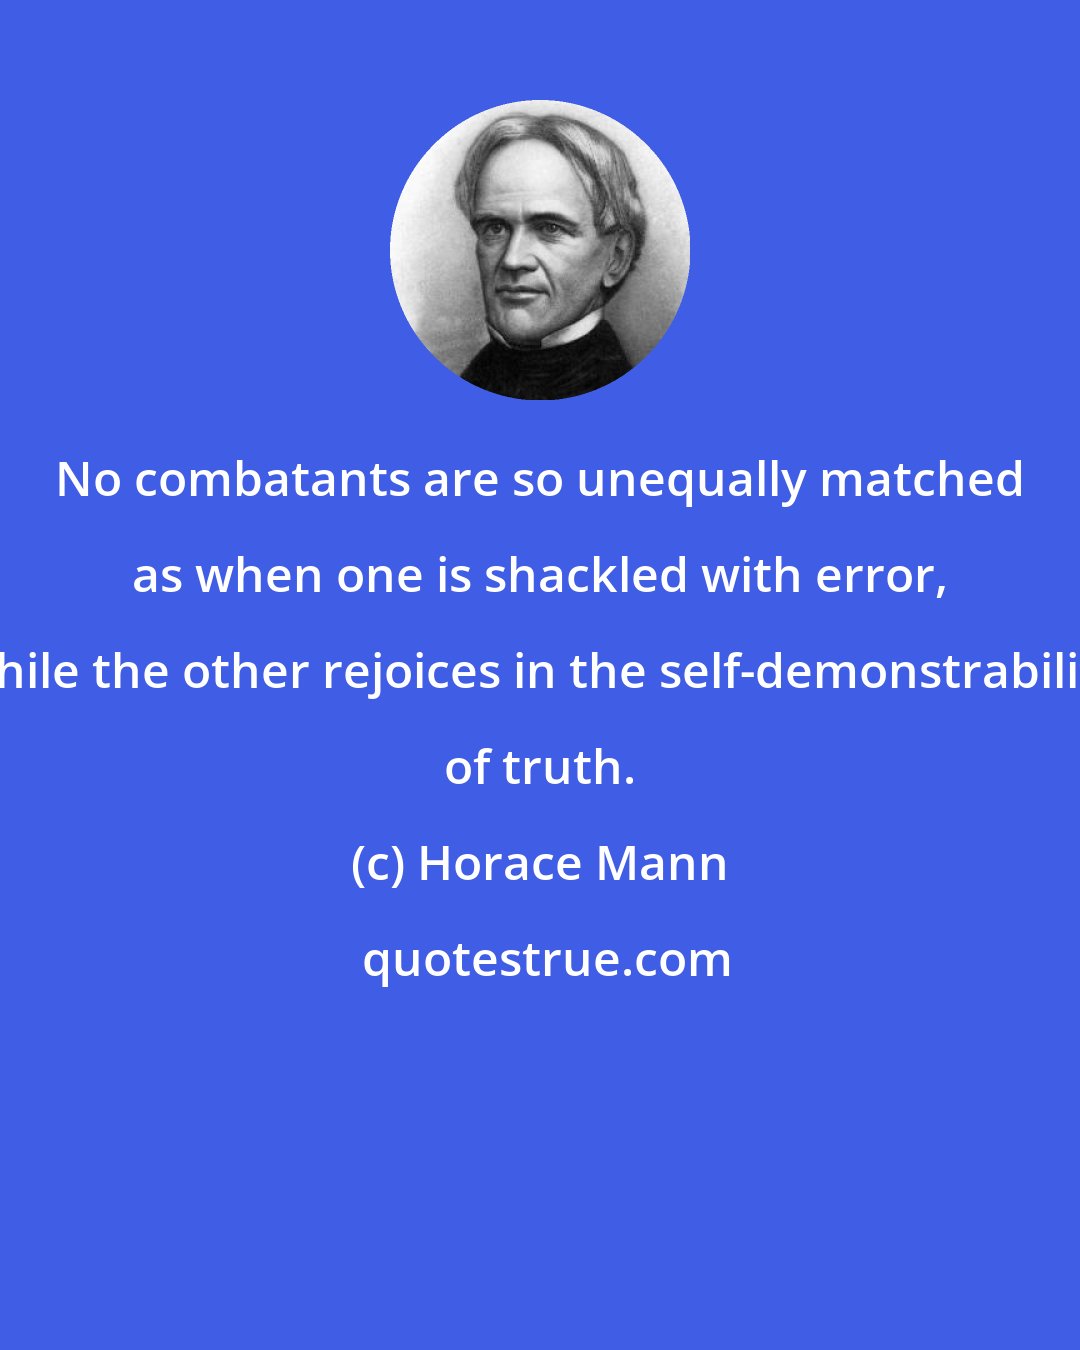 Horace Mann: No combatants are so unequally matched as when one is shackled with error, while the other rejoices in the self-demonstrability of truth.